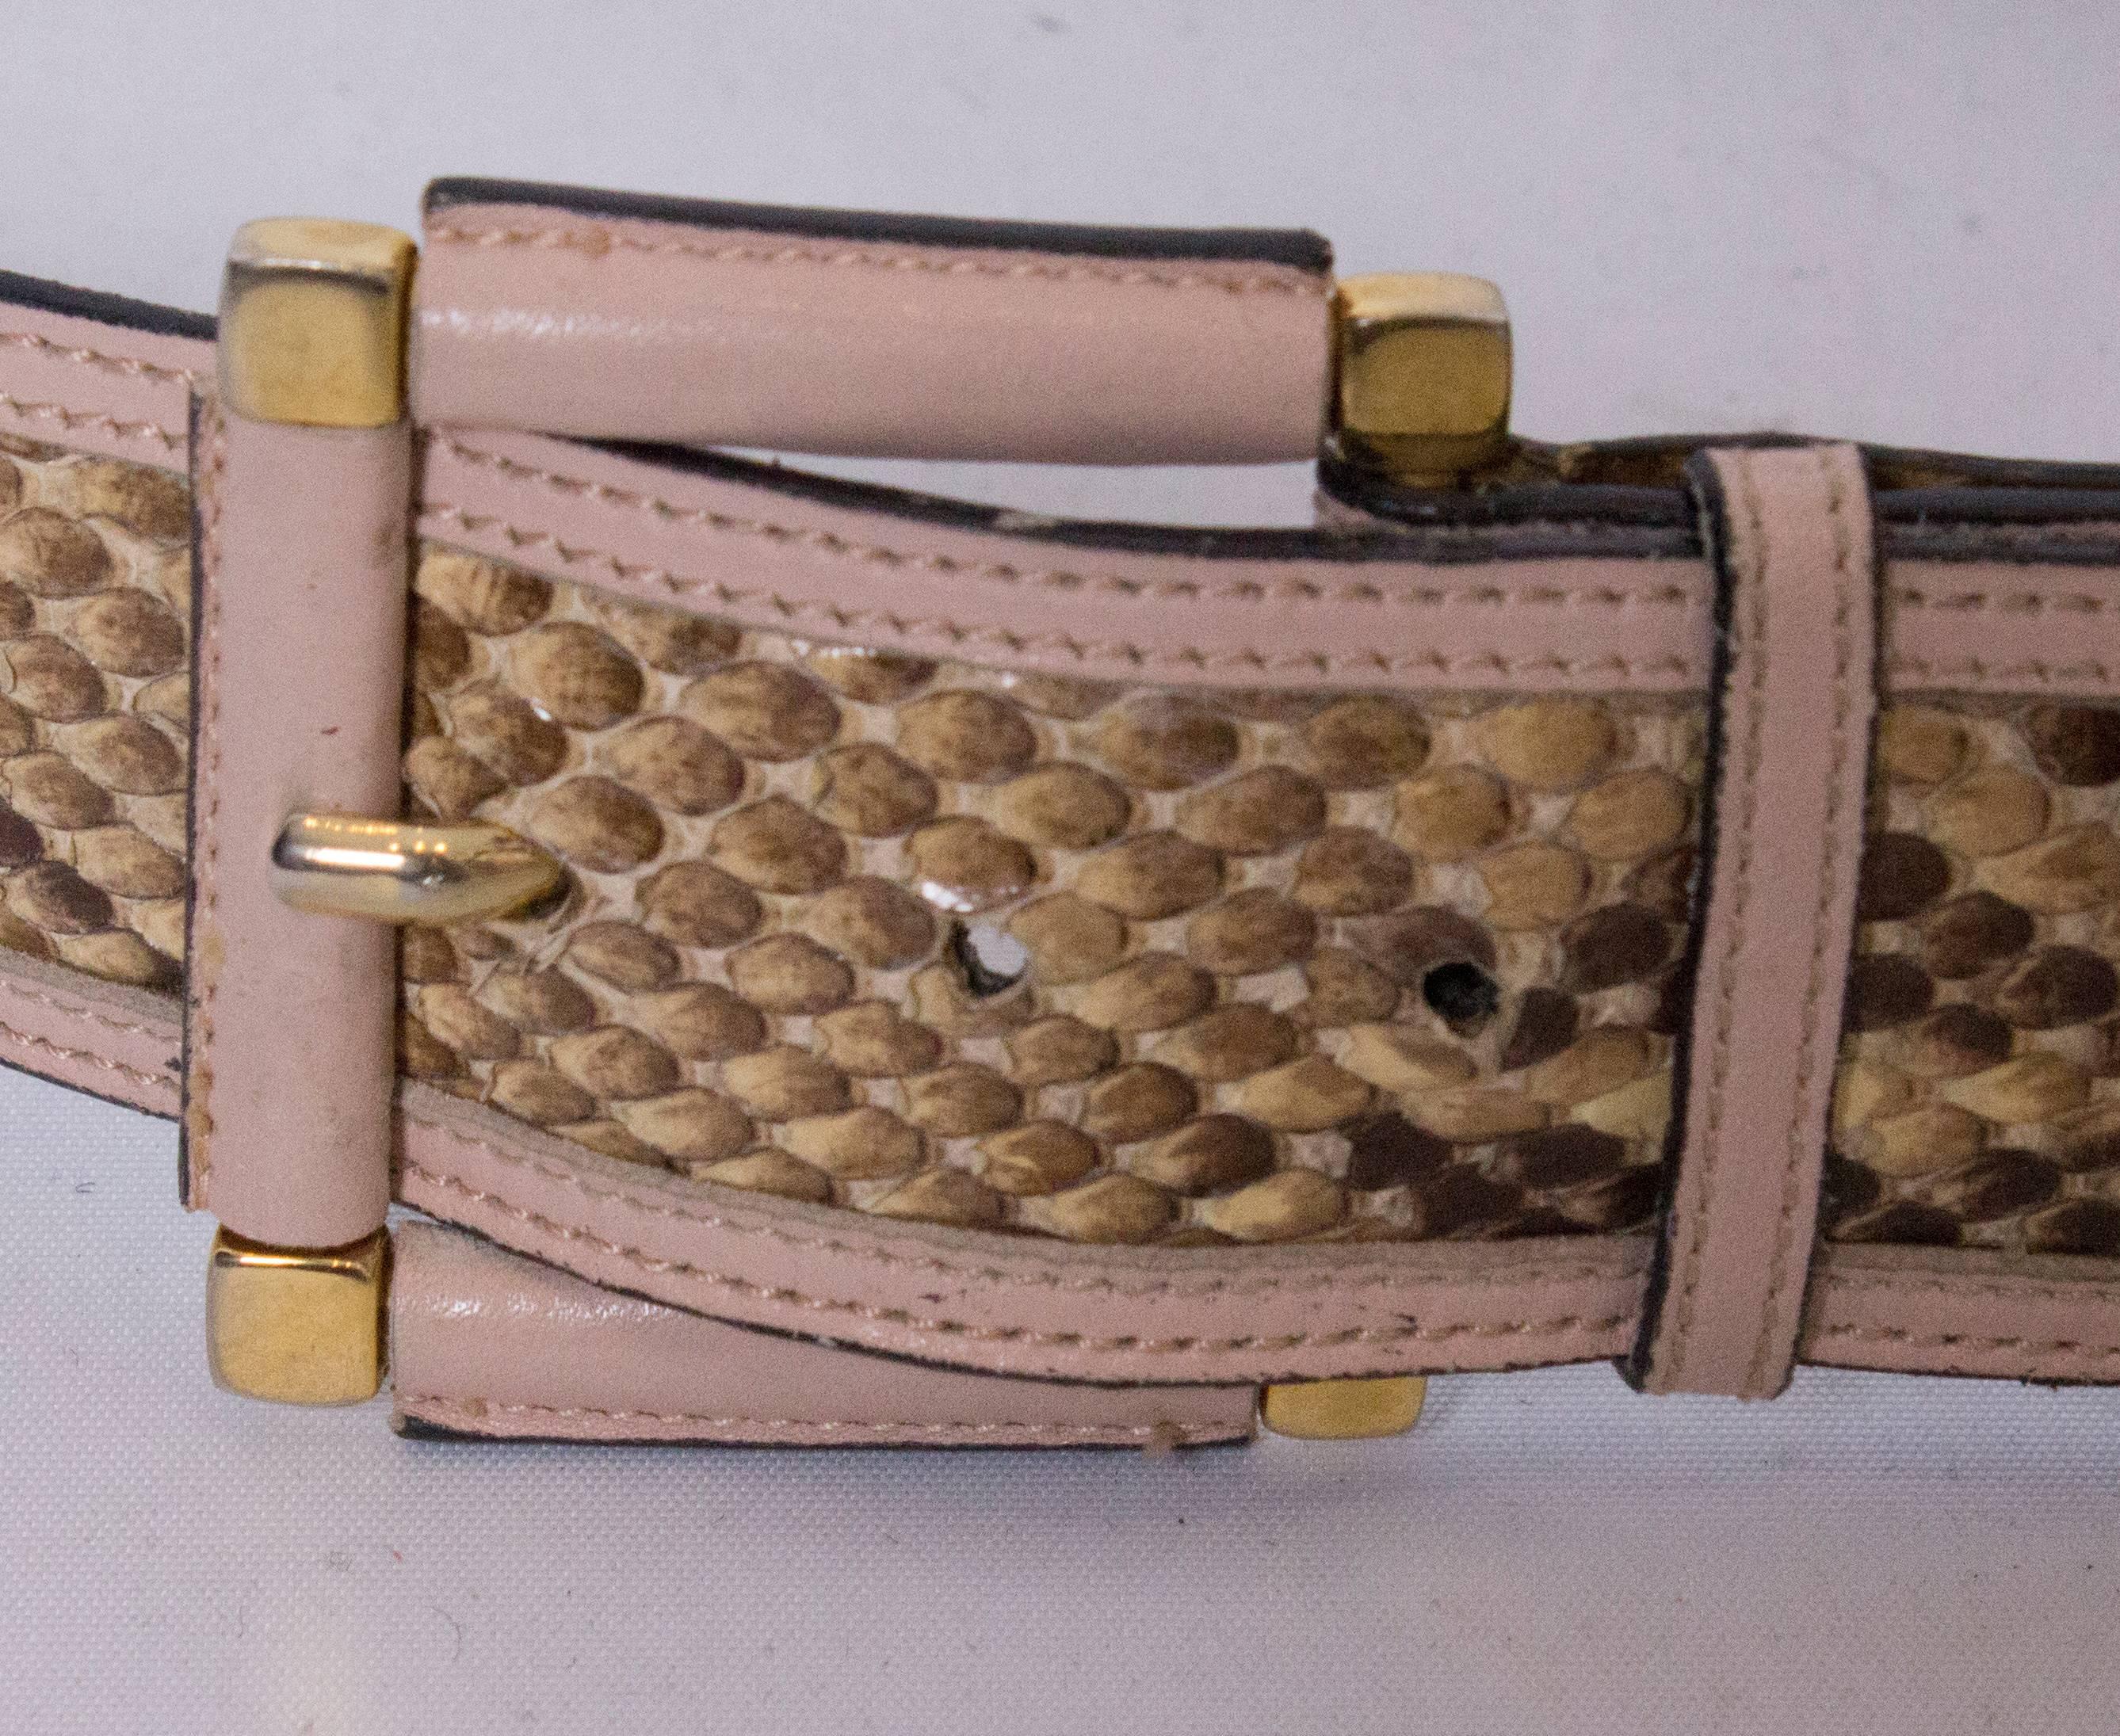 A pretty snakeskin belt by Escada.In beige snakeskin with a pale pink leather trim, and pink buckle.The belt is numbered 316  25538 , lenght 34'', height 1 1/2''.